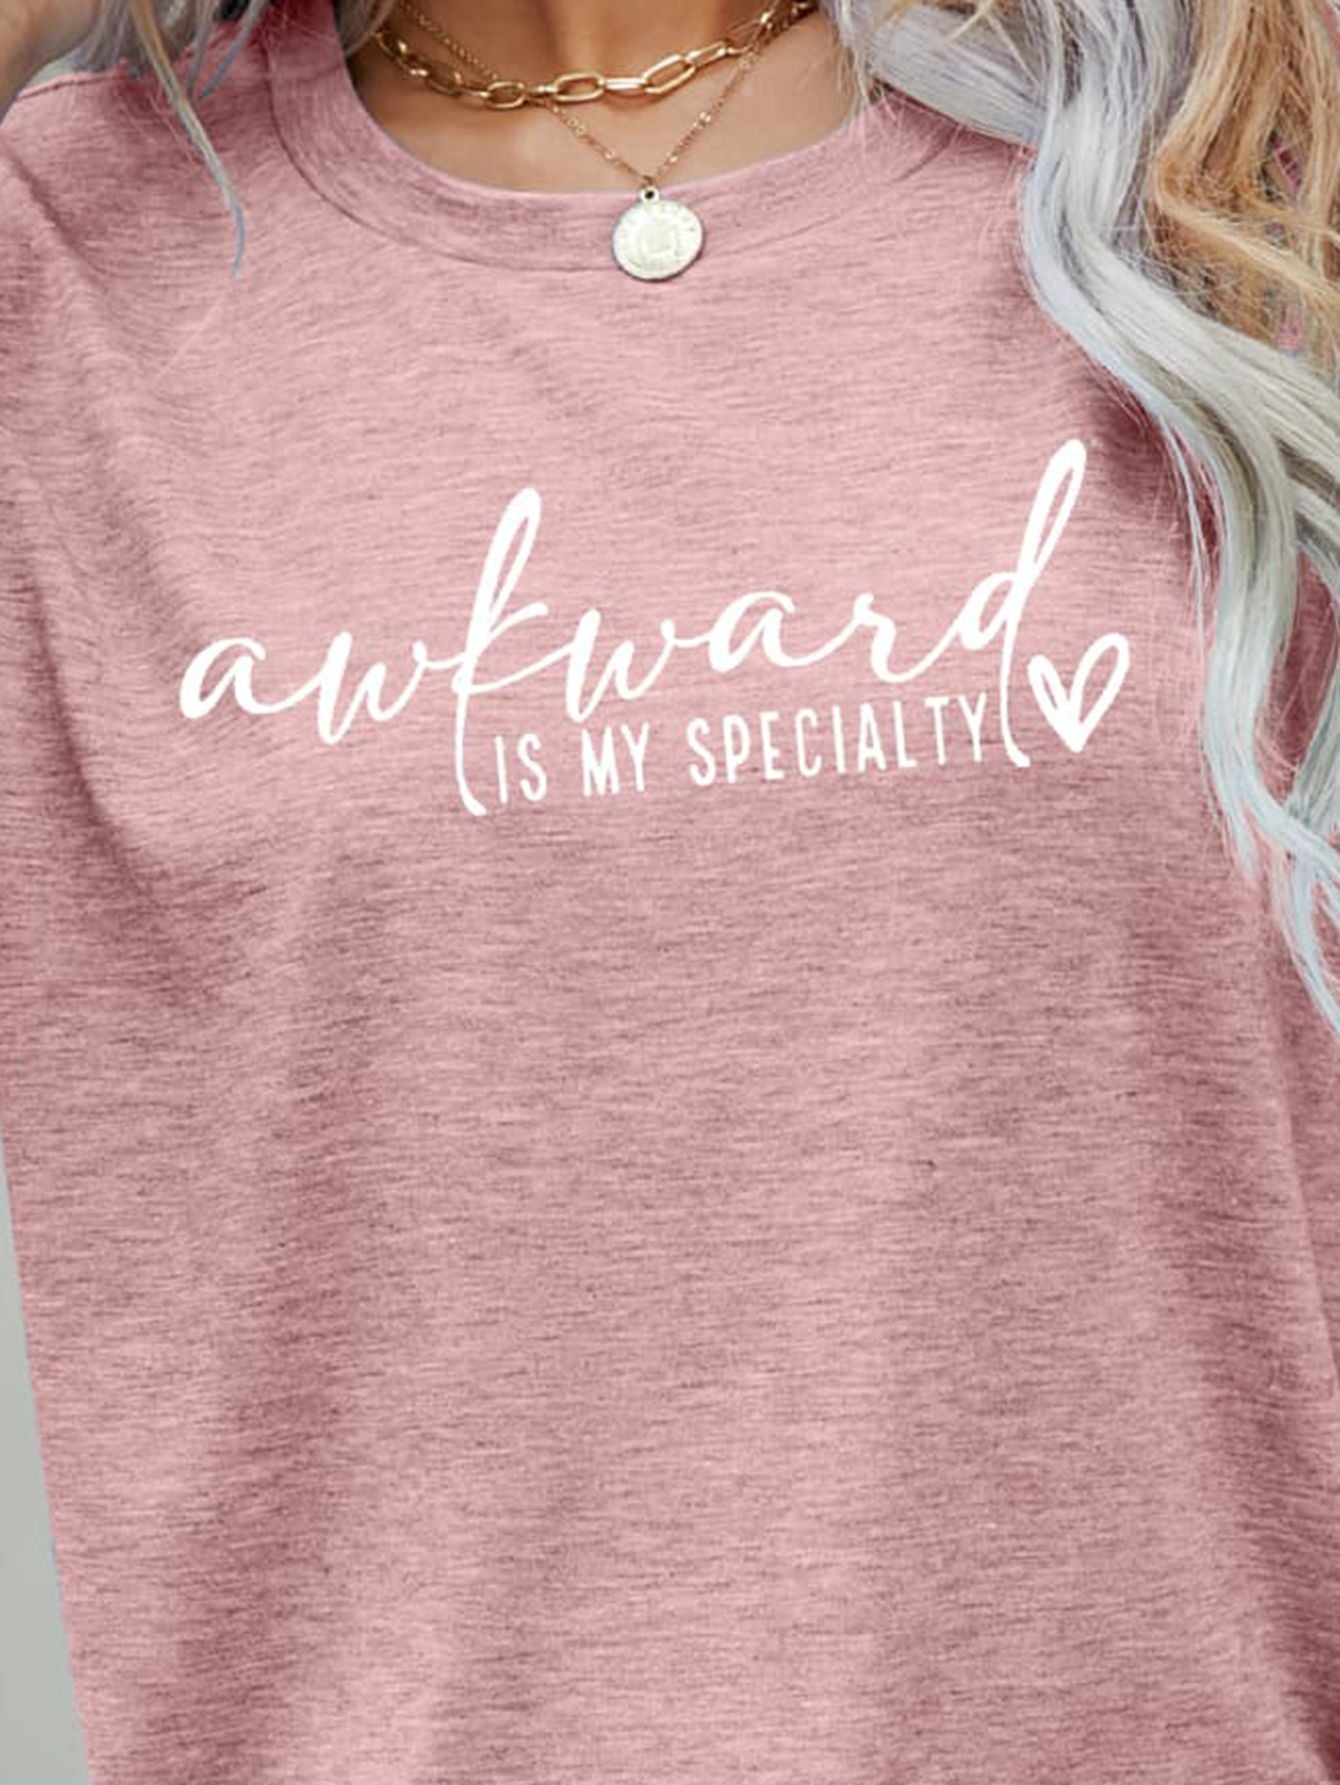 AWKWARD IS MY SPECIALTY Graphic Tee - T-Shirts - Shirts & Tops - 6 - 2024